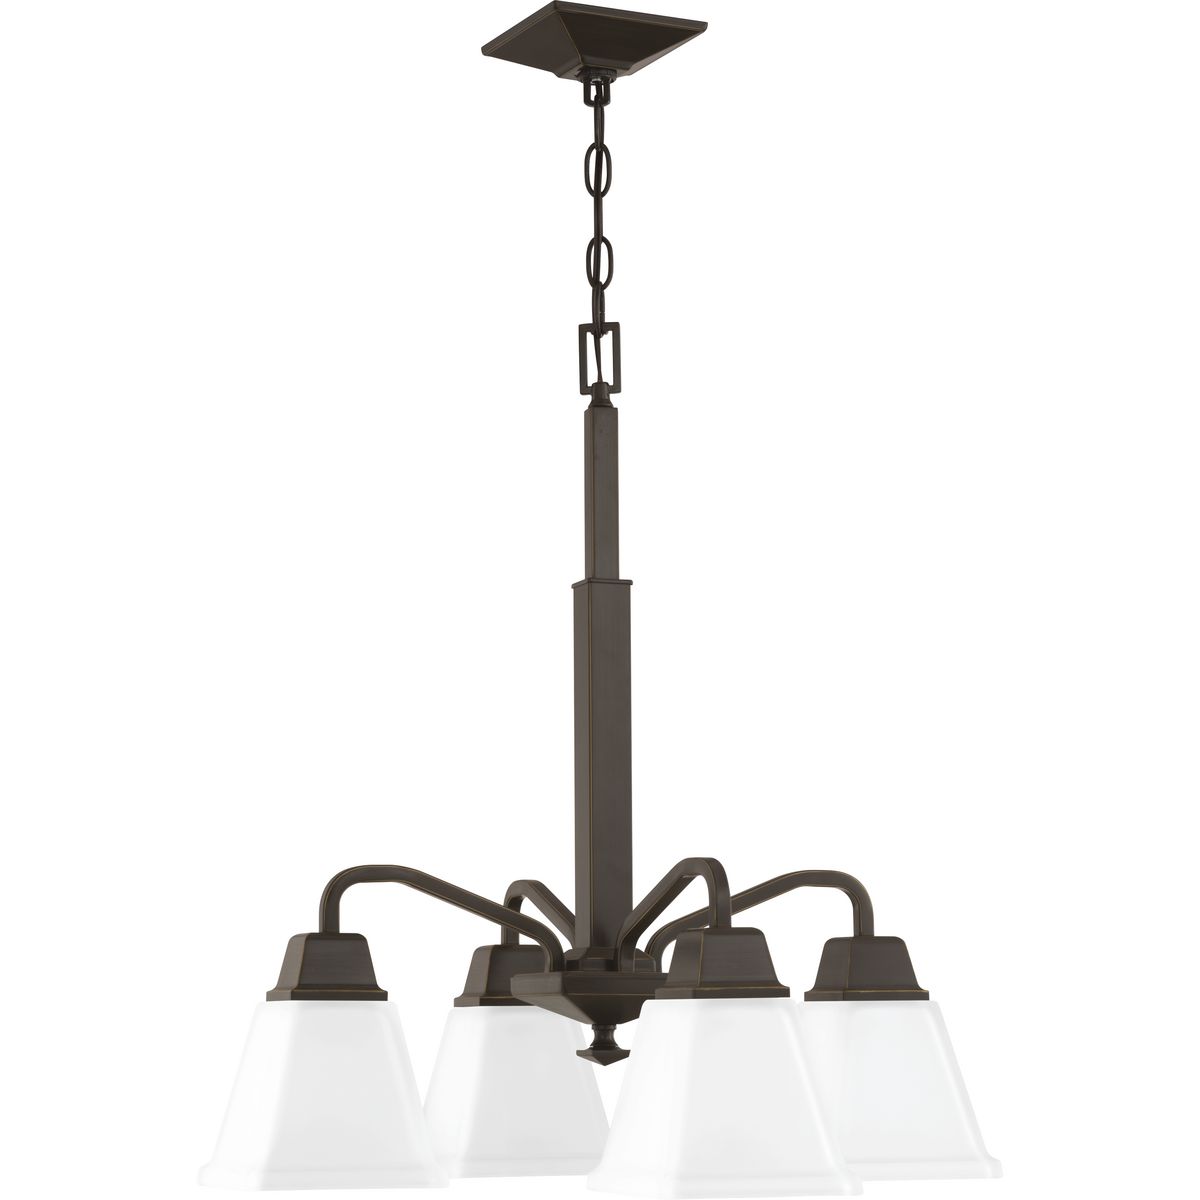 Clifton Heights Collection Four-Light Antique Bronze Etched Glass Craftsman  Chandelier Light, P400118-020